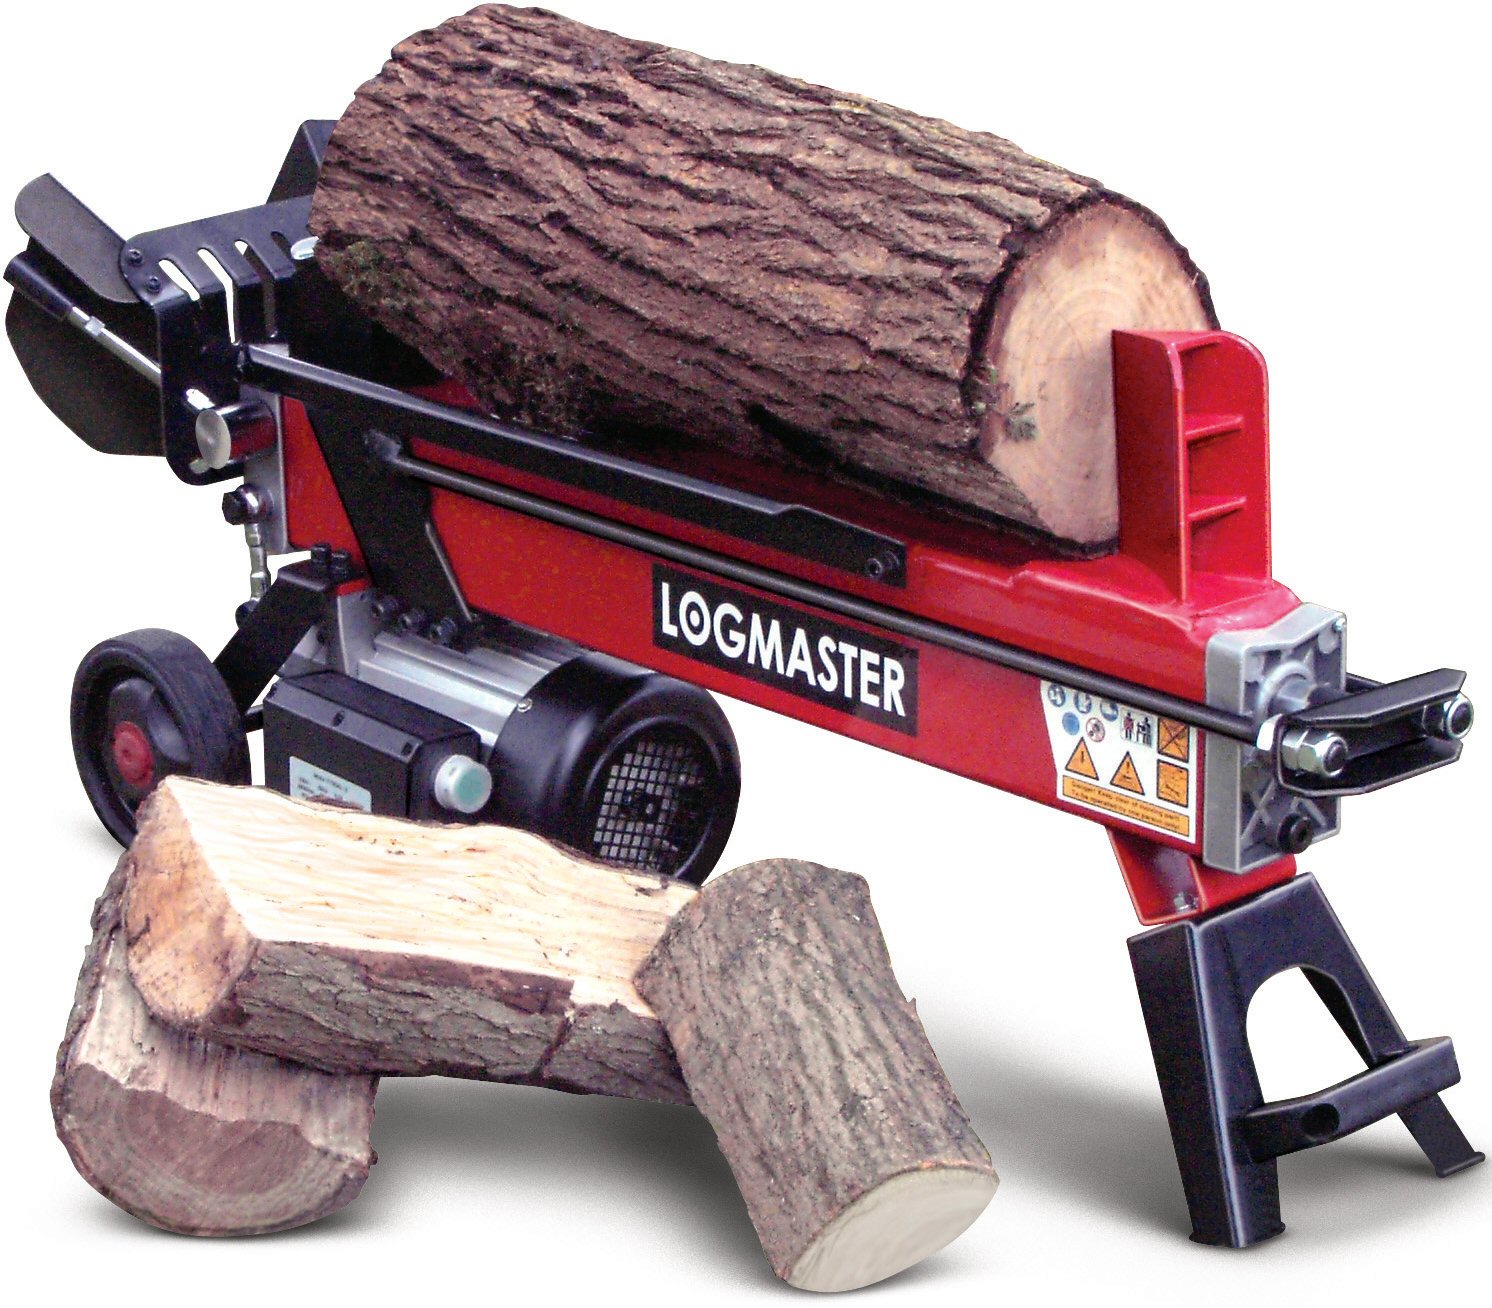 Logmaster will prove to be a genuine workhorse and will turn laborious time consuming log chopping f